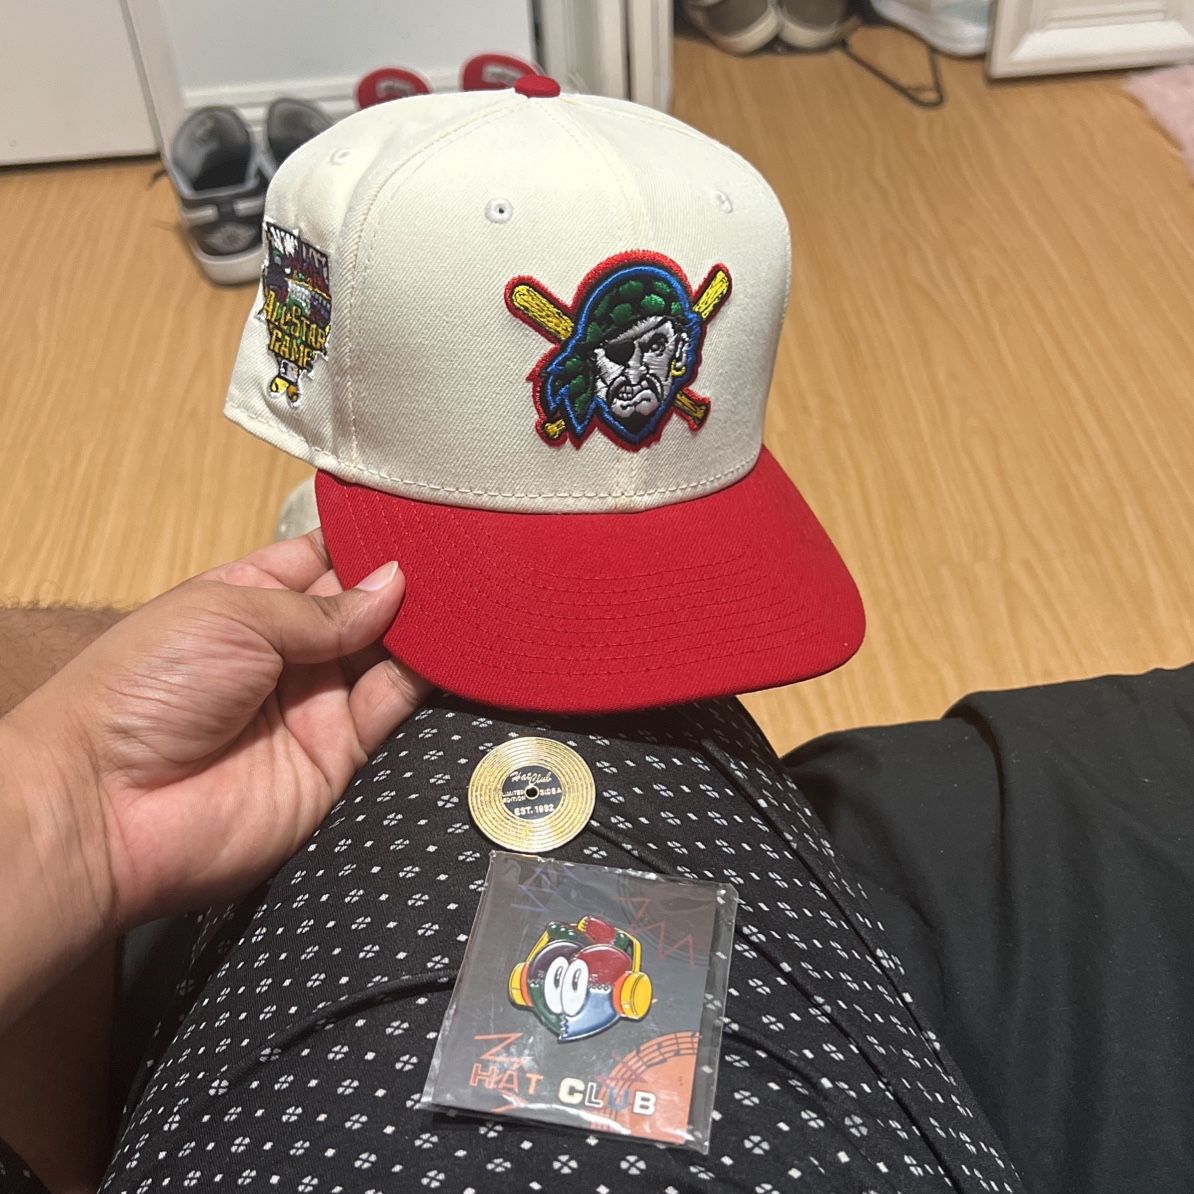 Mac Miller Hat Club Fitted 7 3/8 for Sale in Colton, CA - OfferUp